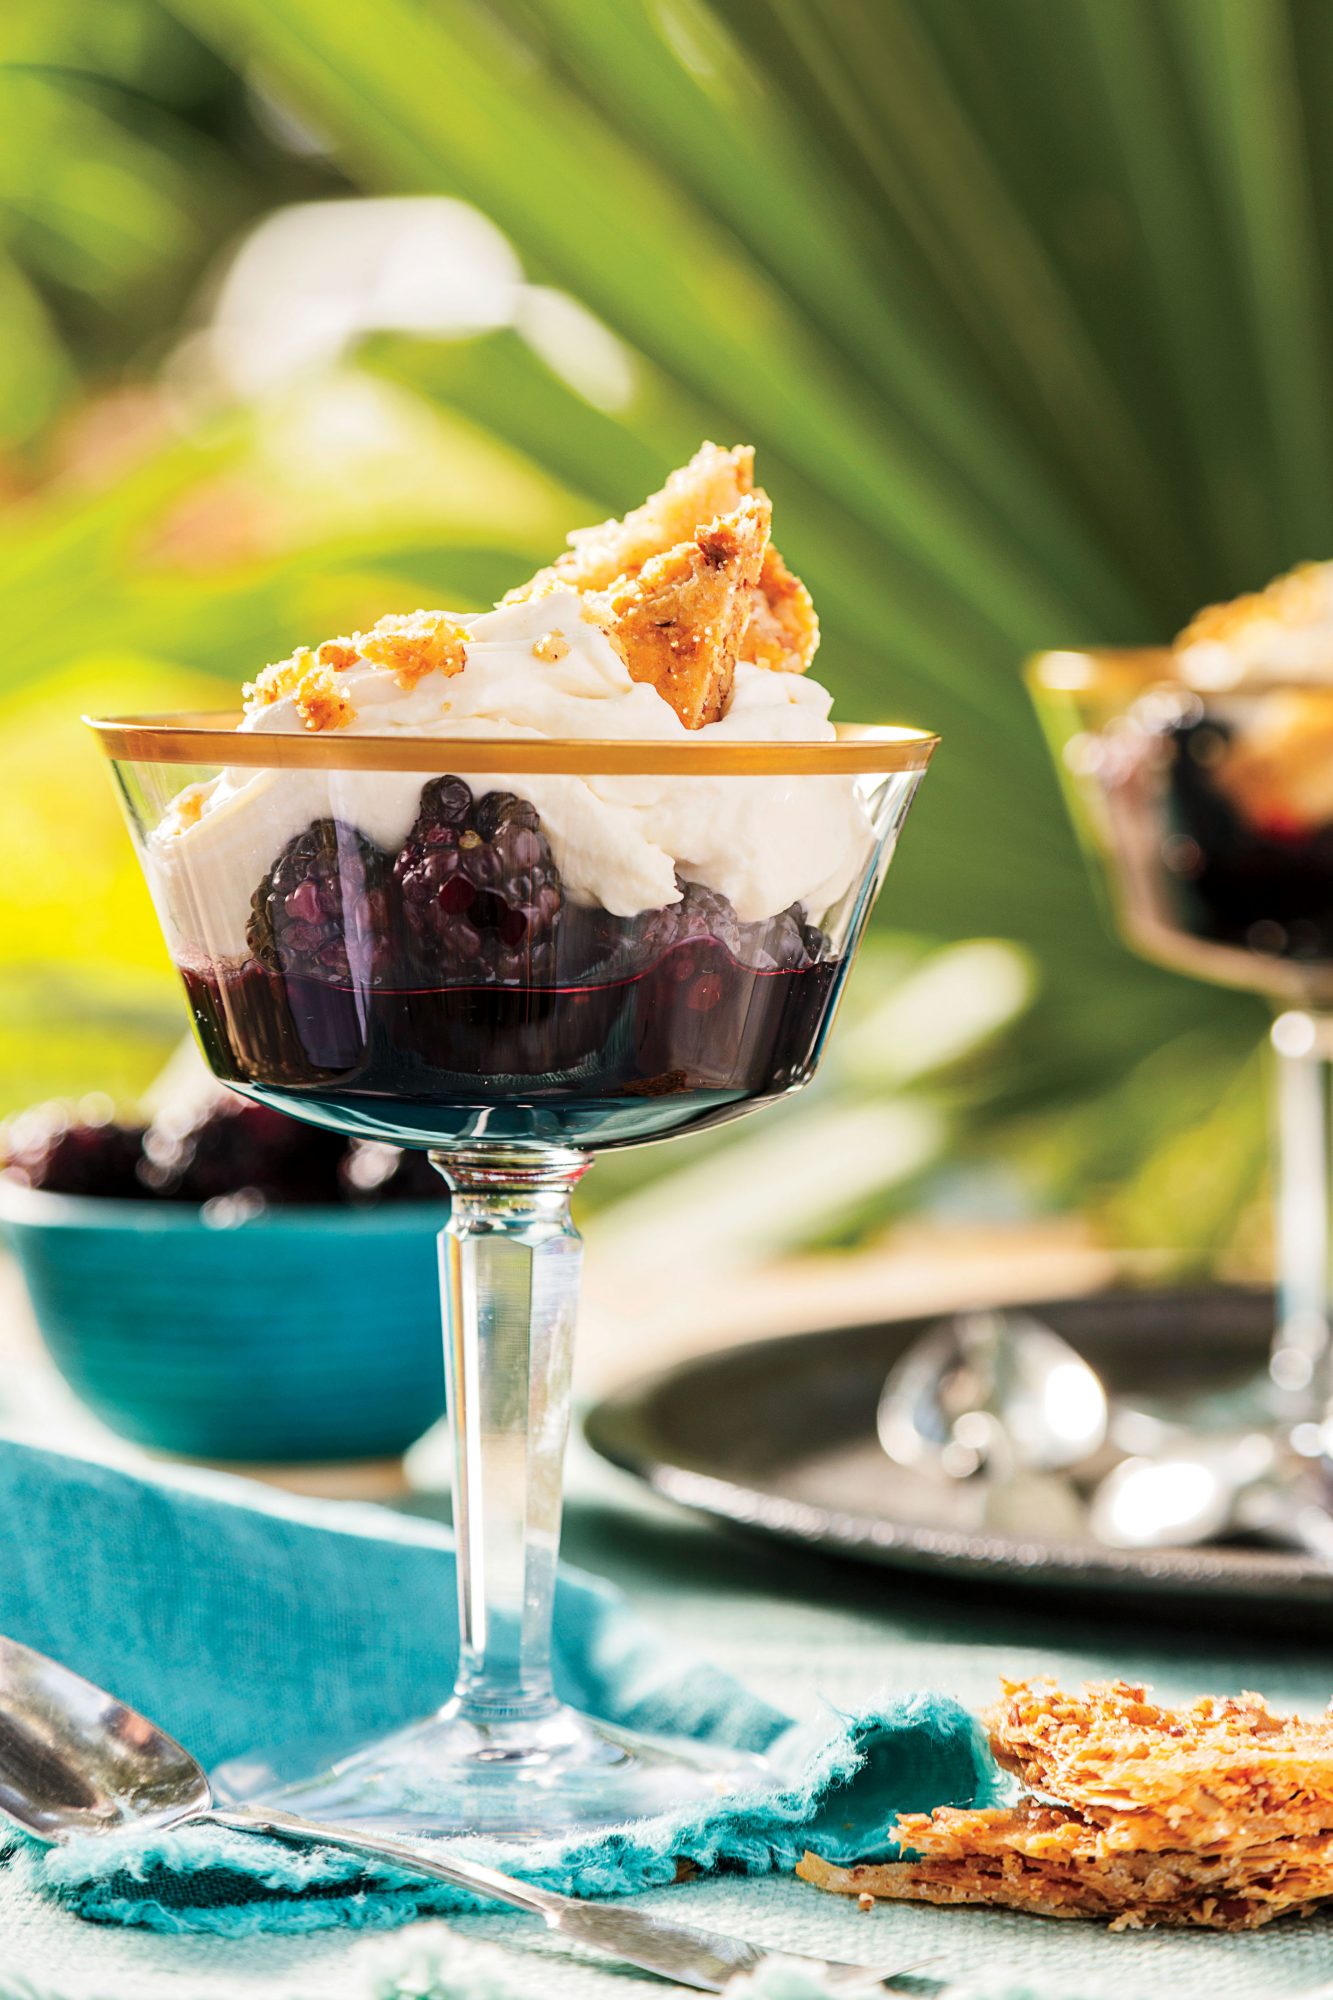 Blackberry Trifles with Pecan Feuilletage and Mascarpone-Cane Syrup Mousse